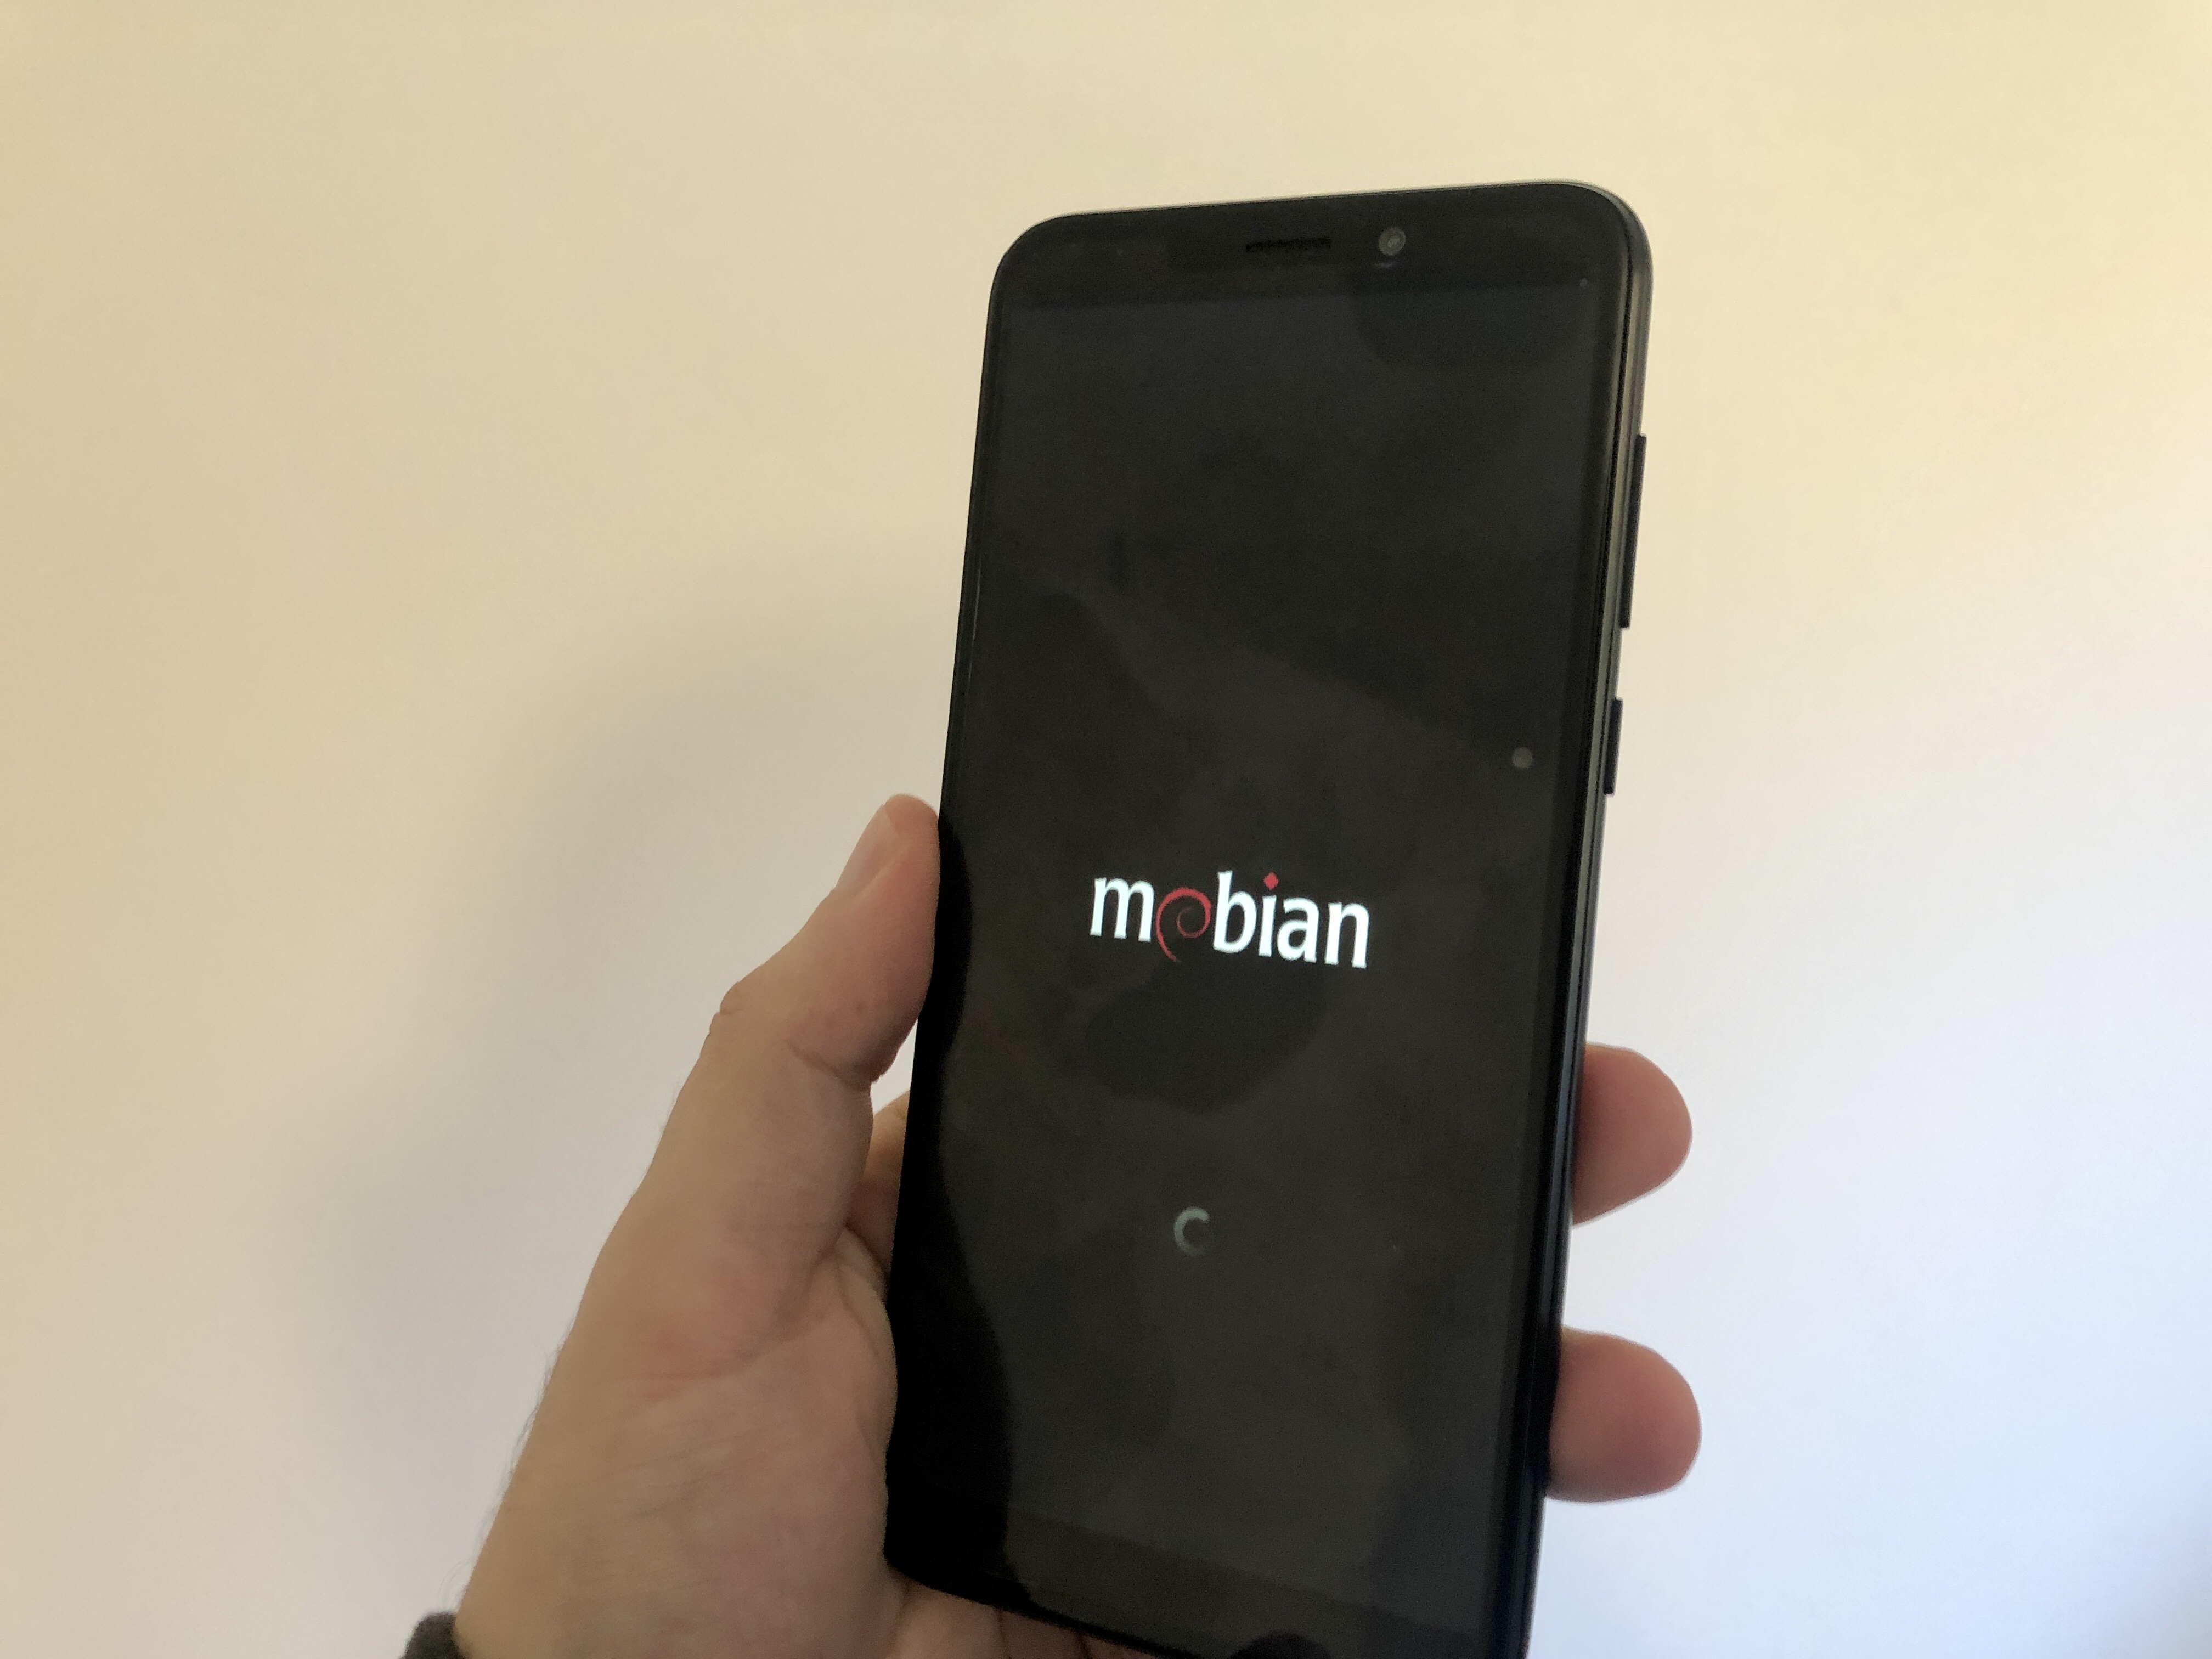 Photo of PinePhone with Mobian load screen